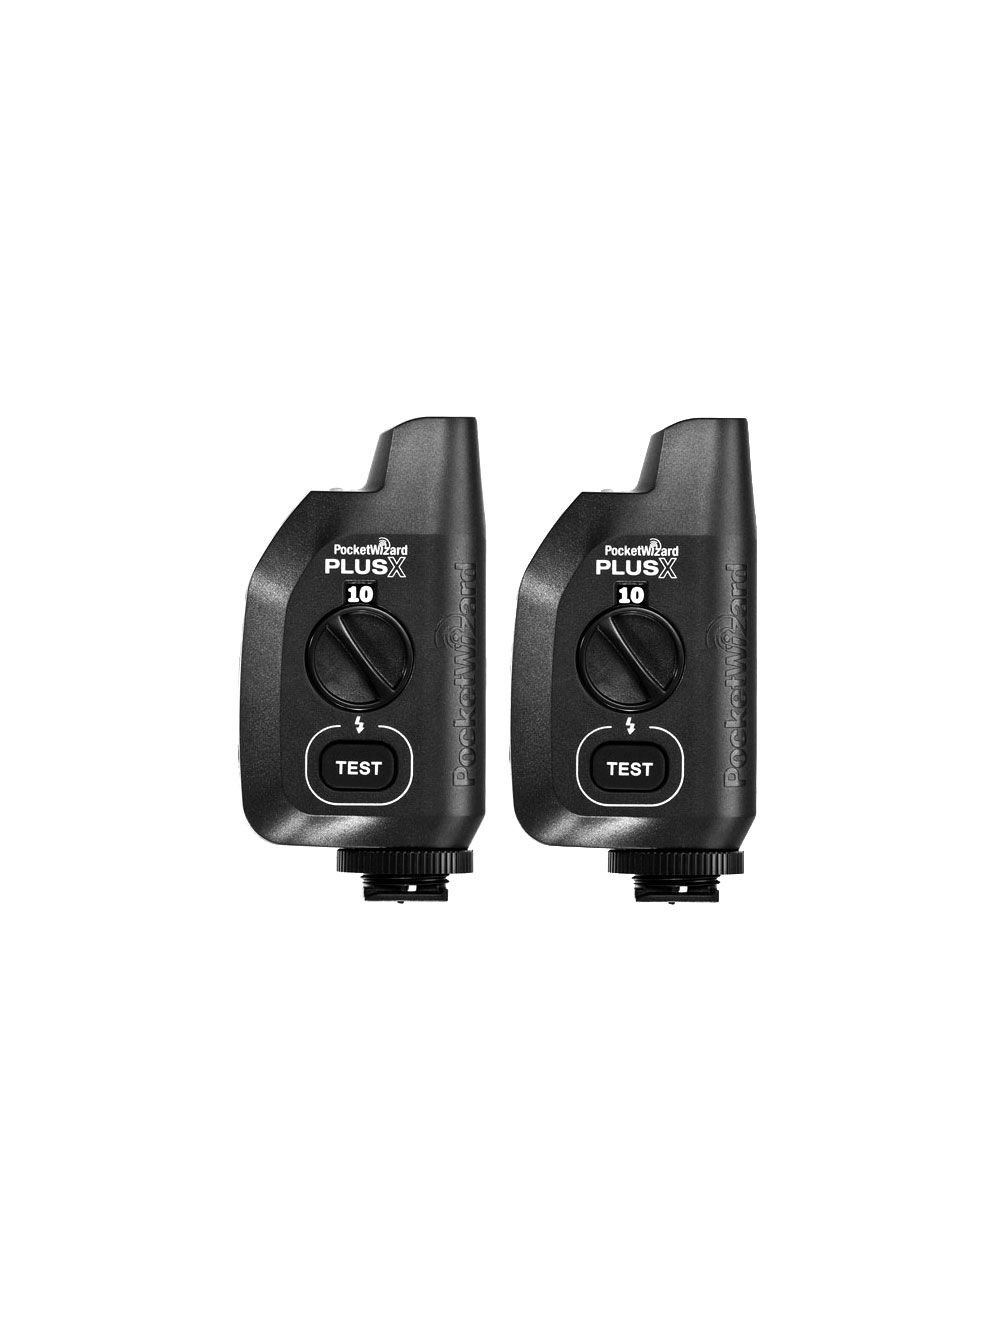 Pocketwizard Plus X Transceiver TWIN PACK Borge's Imaging